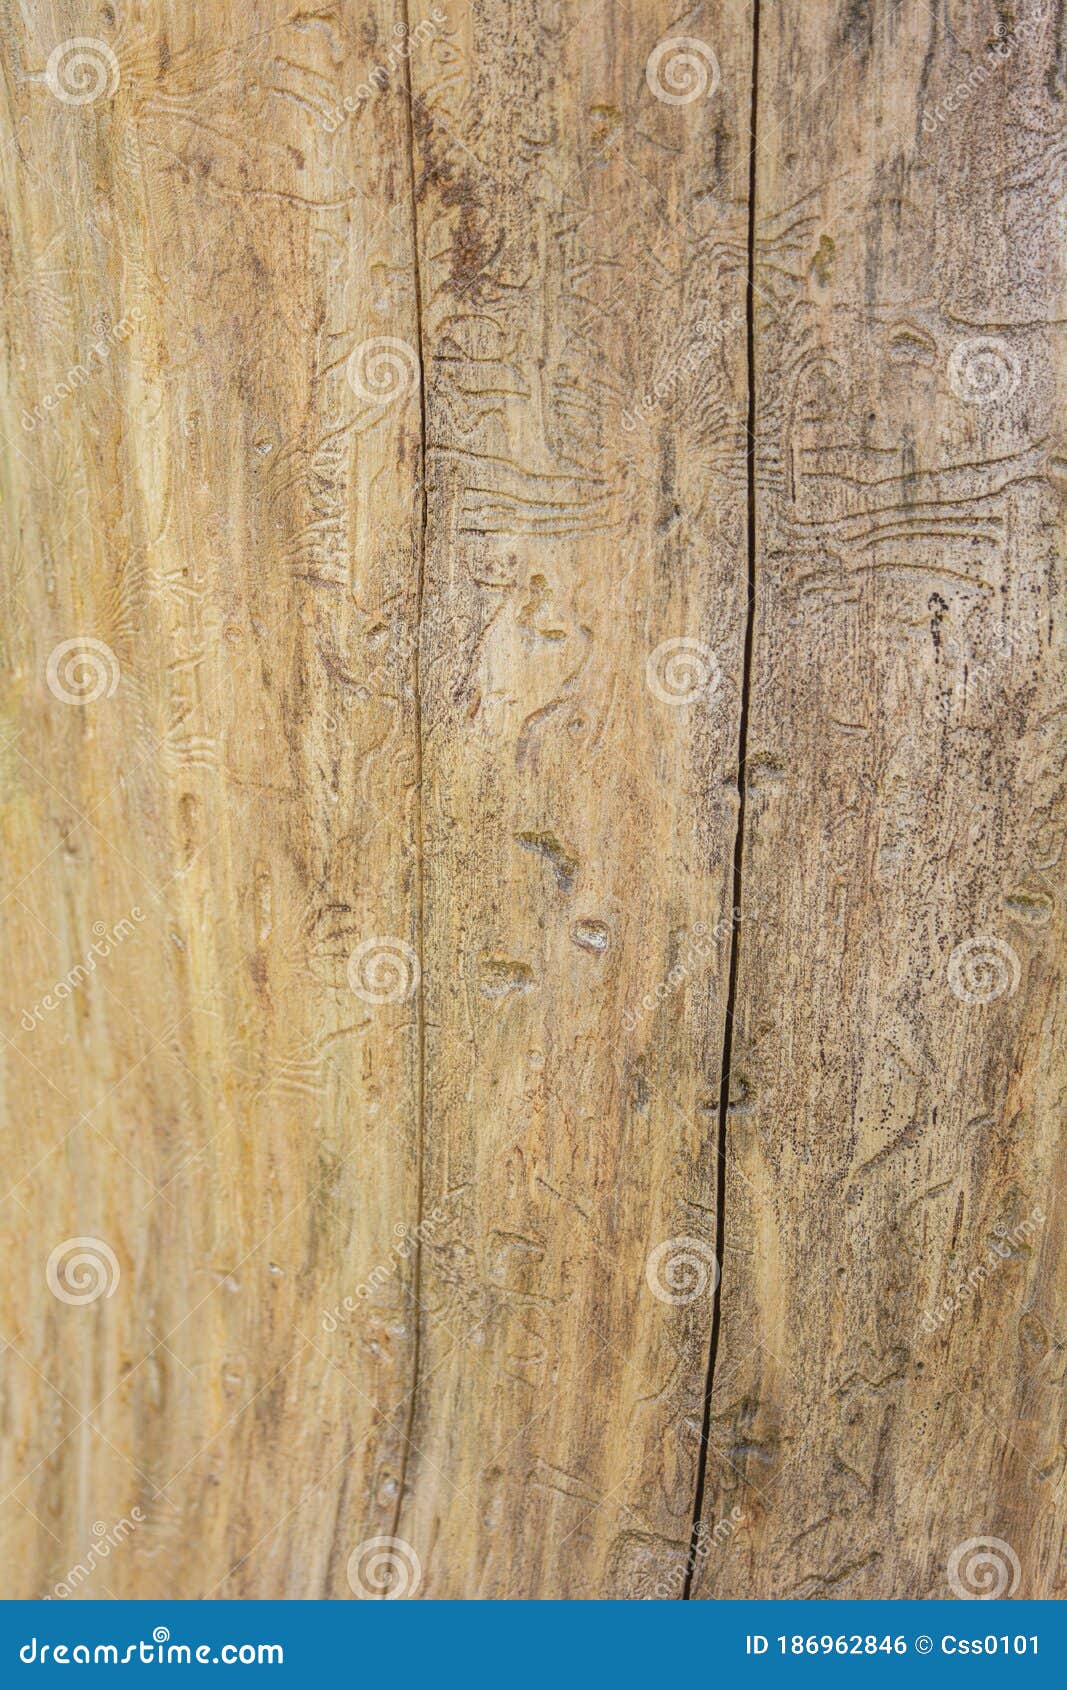 Trunk of Dead Tree without Bark with Traces of Beetles. Natural Wooden ...